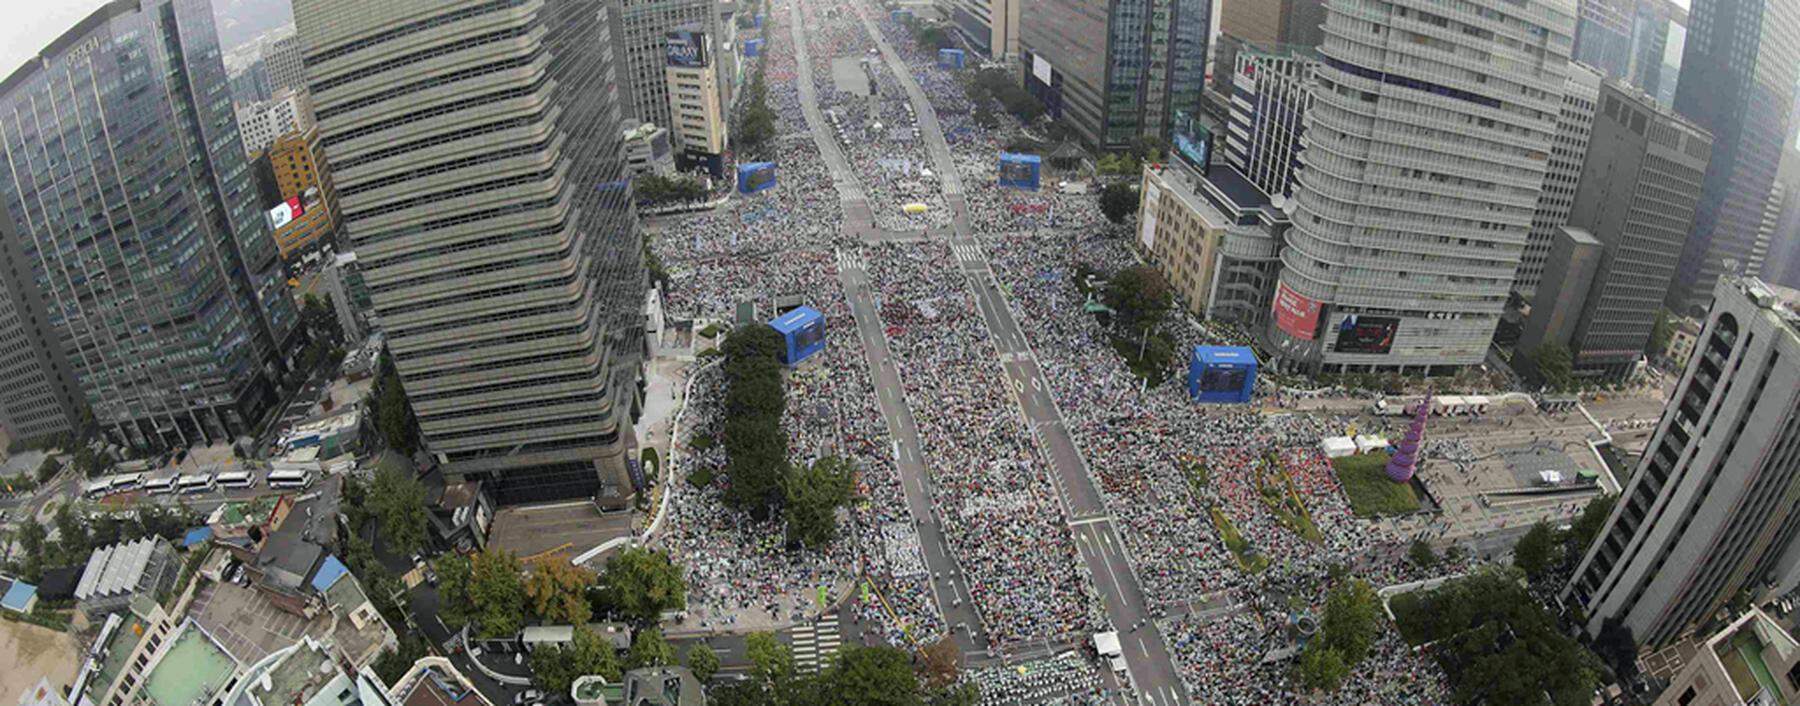 Catholic faithful gather to watch a Holy Mass led by Pope Francis at Gwanghwamun square in Seoul